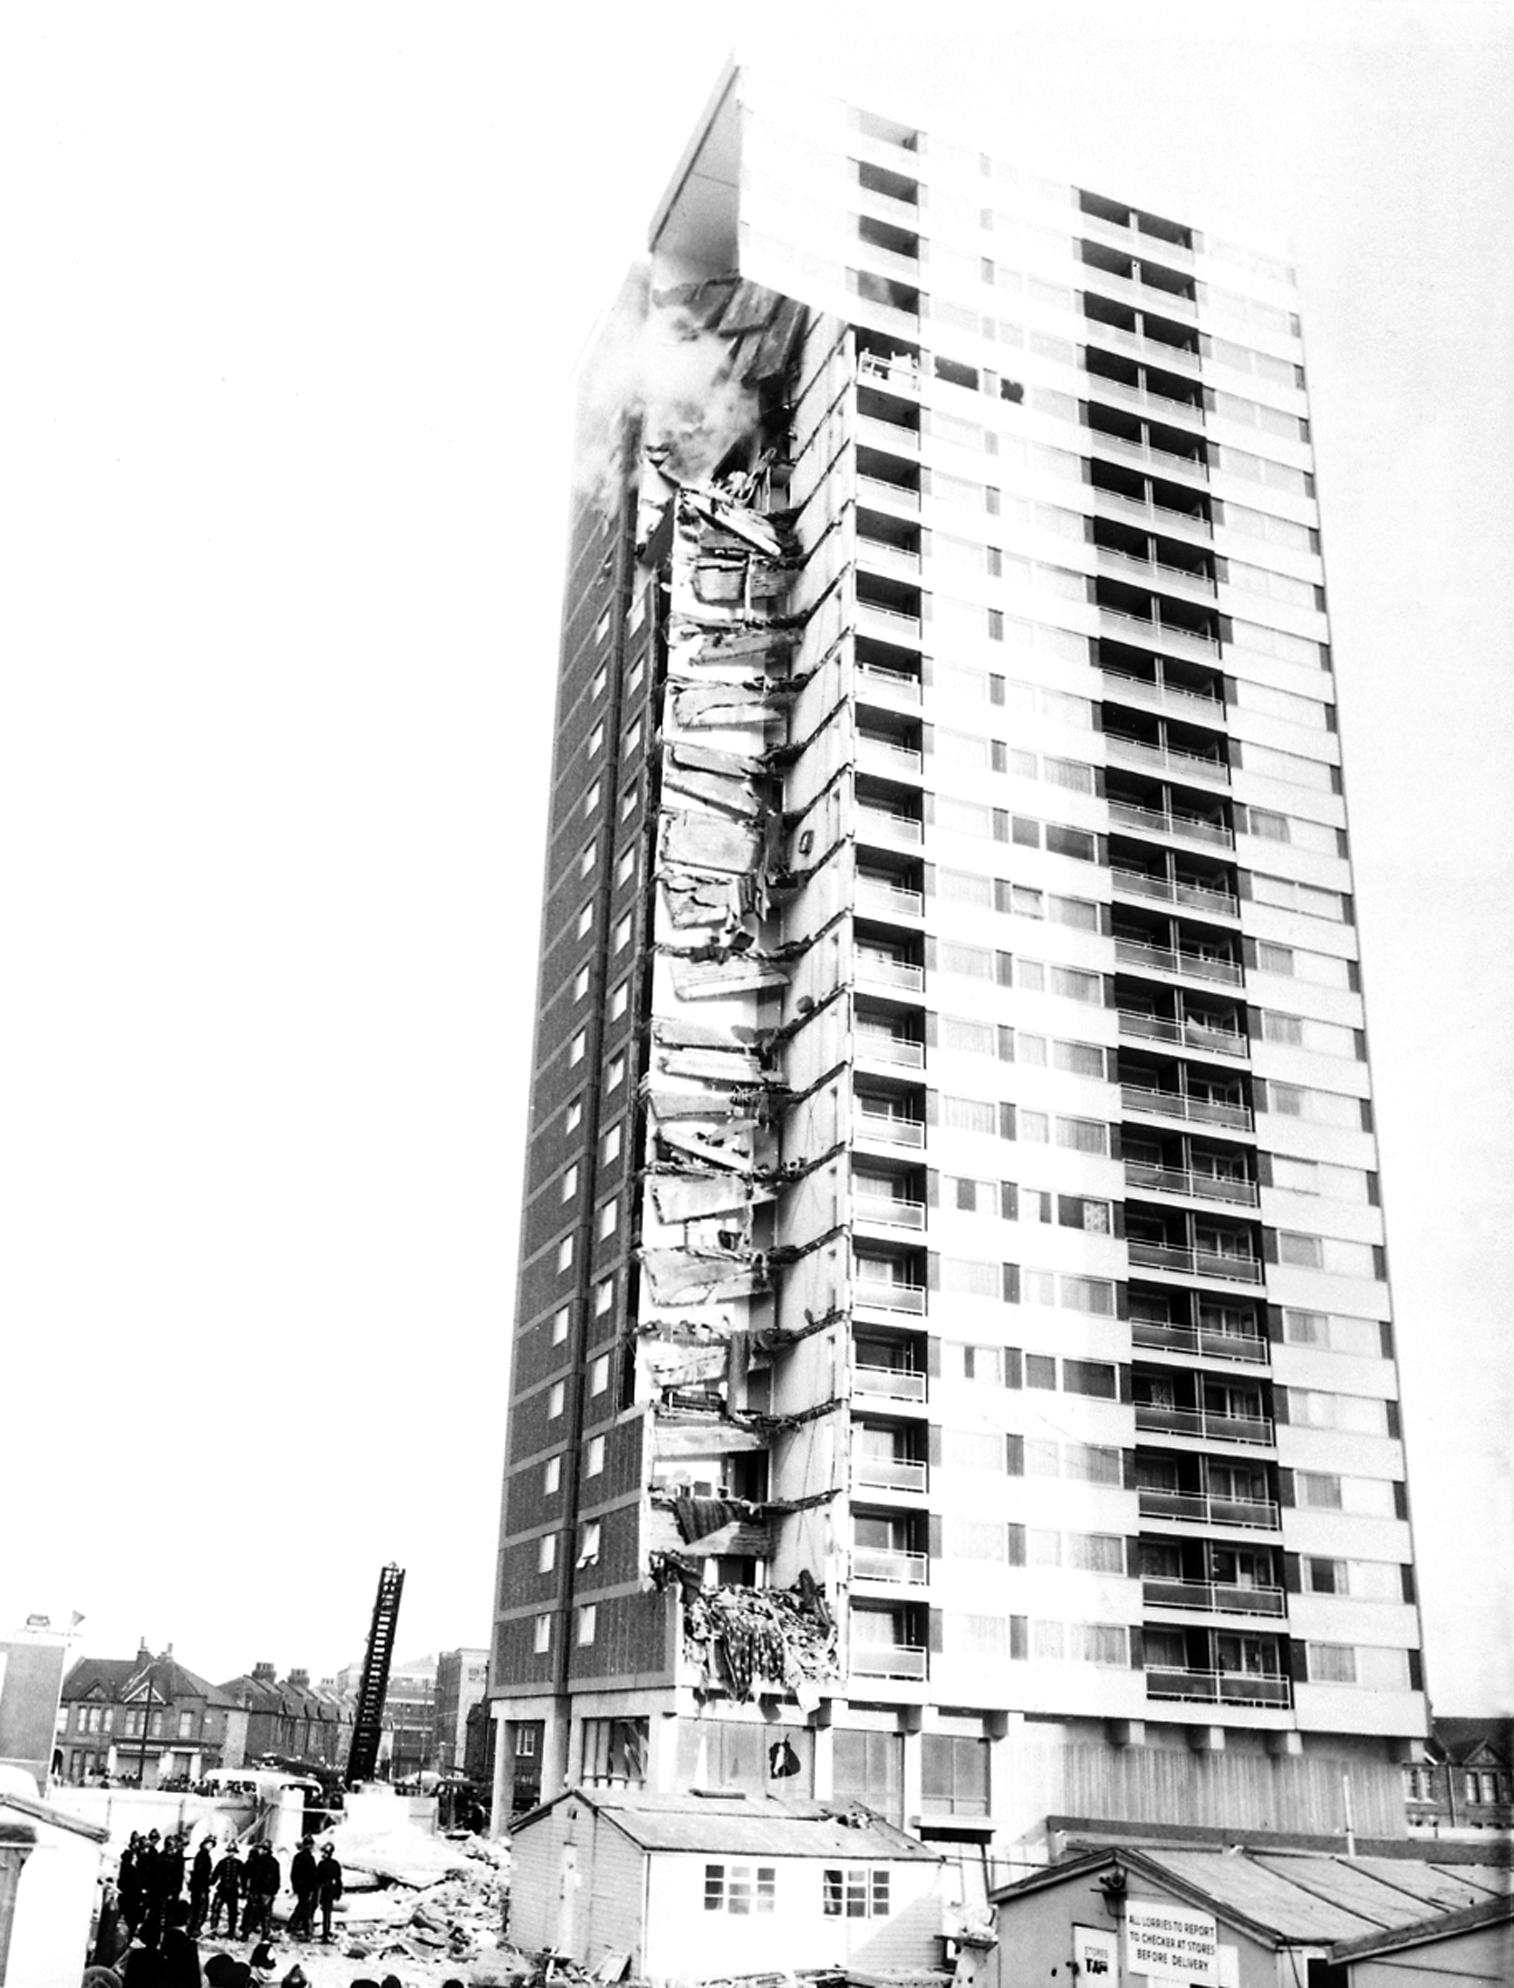 Photograph of extensive damage to Ronan Point tower block following its partial collapse (HLG 157/28)